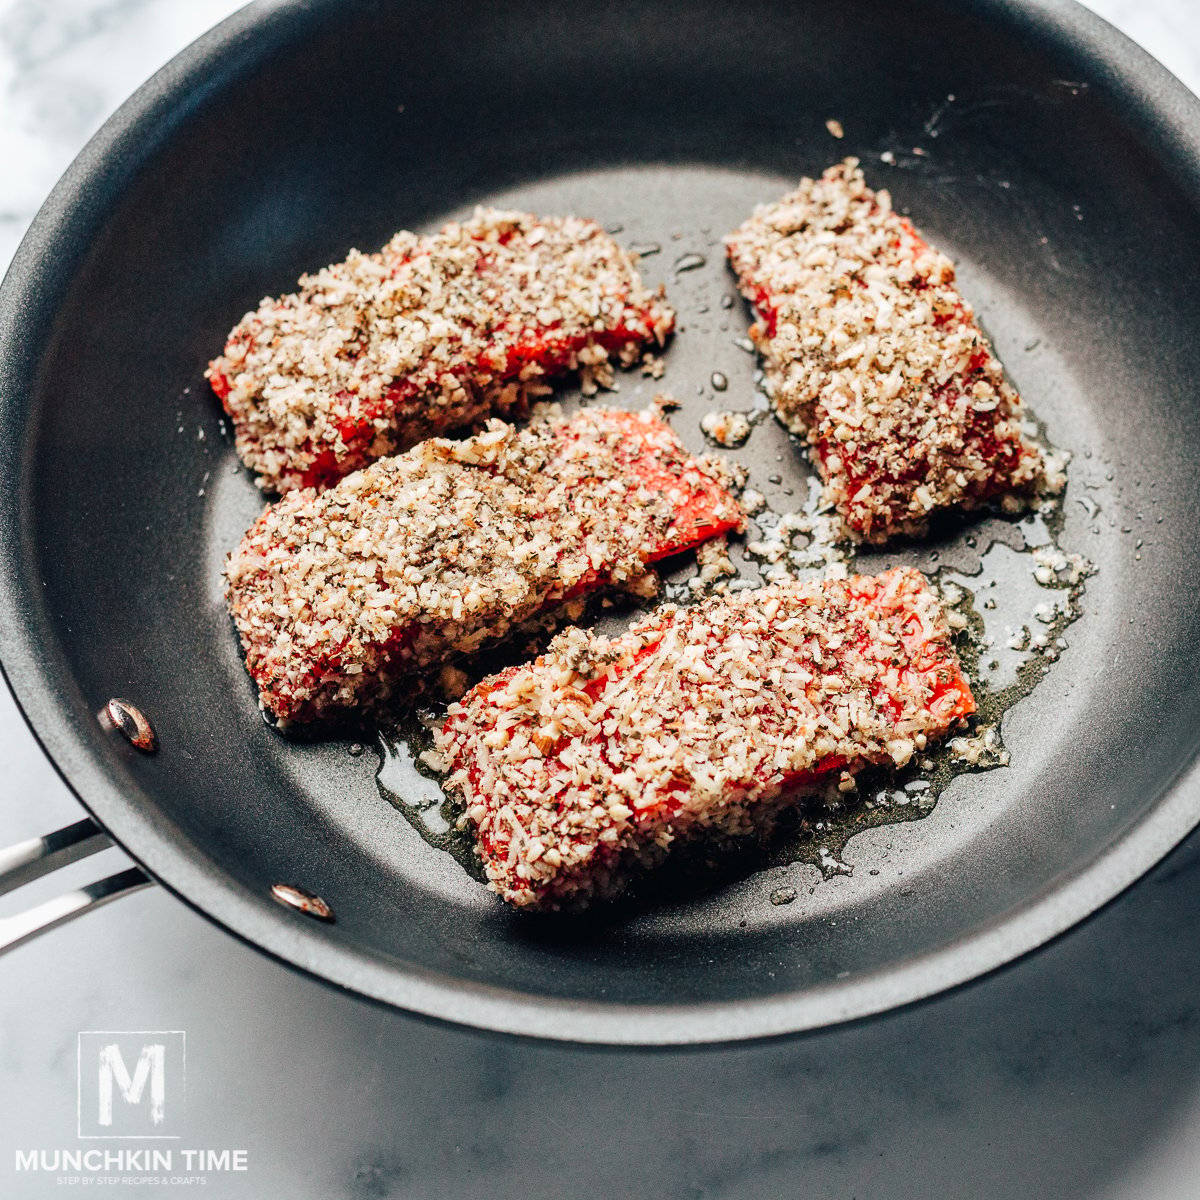 How to make Almond crusted salmon